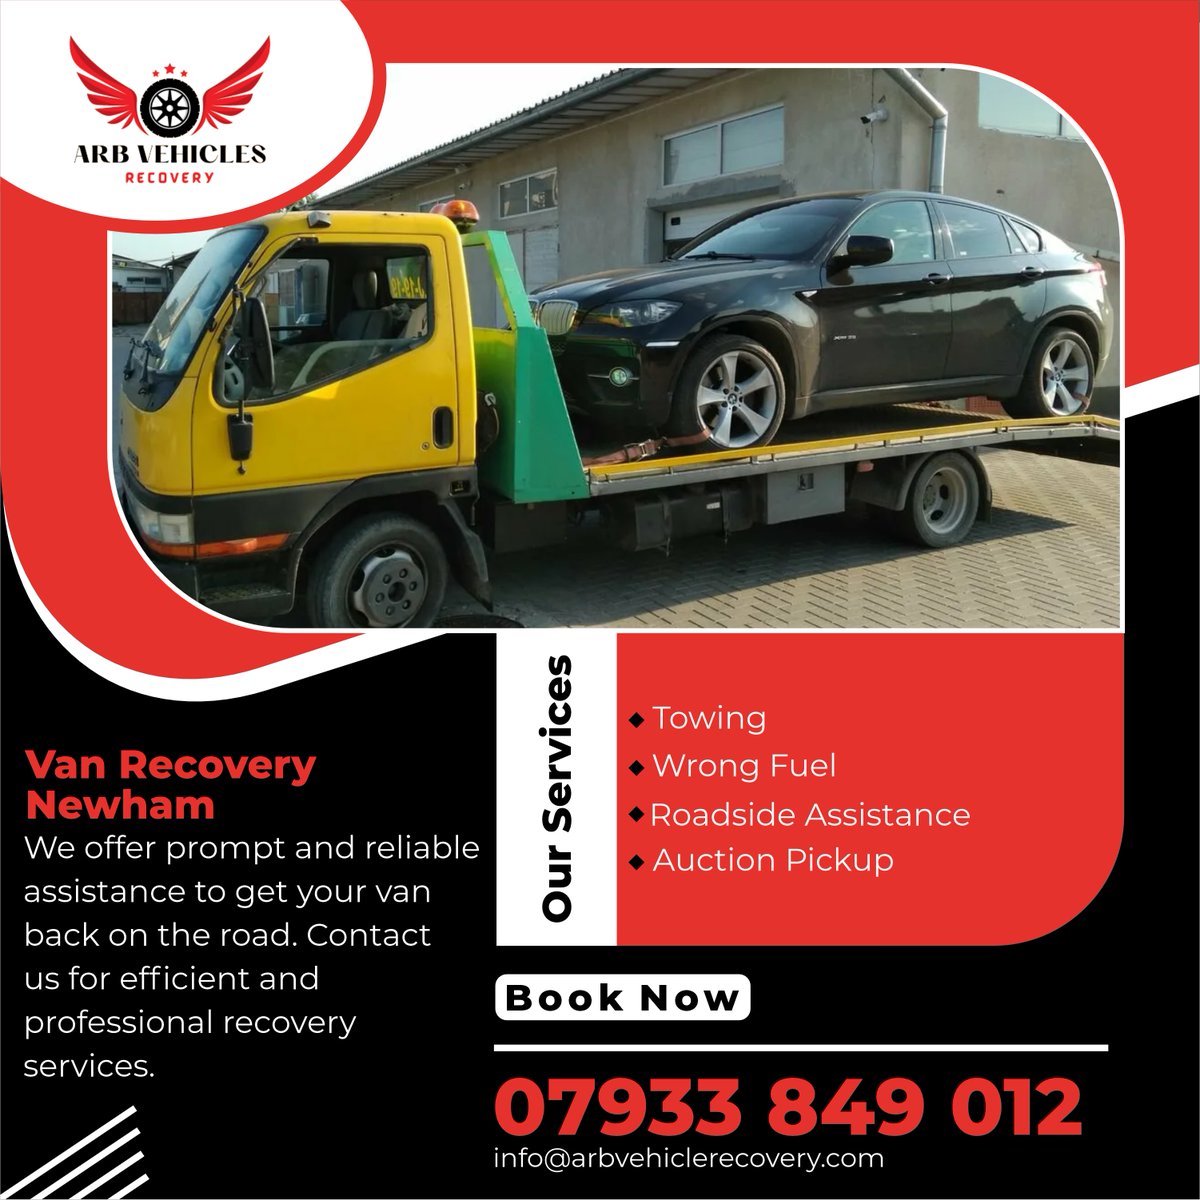 ARB Vehicle Recovery provides efficient van recovery services in Newham. Trust us to safely retrieve and transport your van from any location.

arbvehiclerecovery.co.uk/van-recovery-n…
#VanRecovery
#NewhamRecovery
#VehicleRecovery
#VanTowing
#EmergencyRecovery